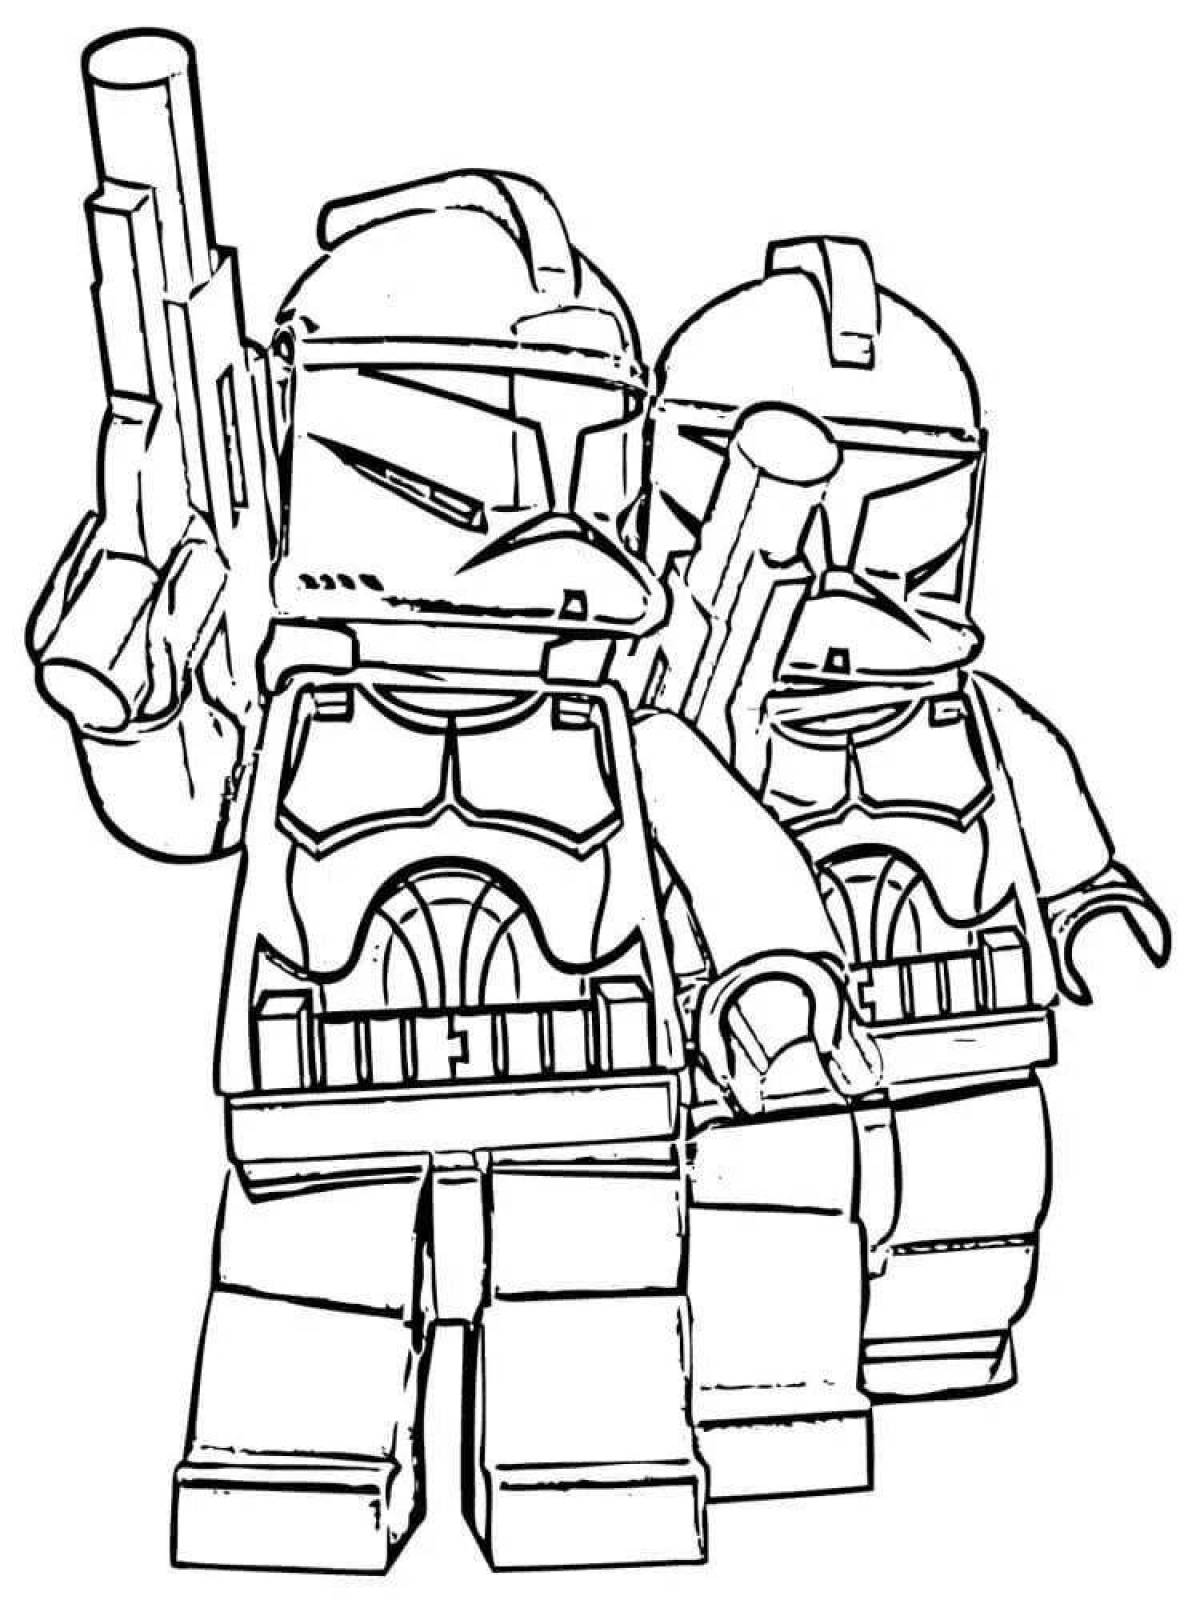 Fabulous lego star wars coloring page